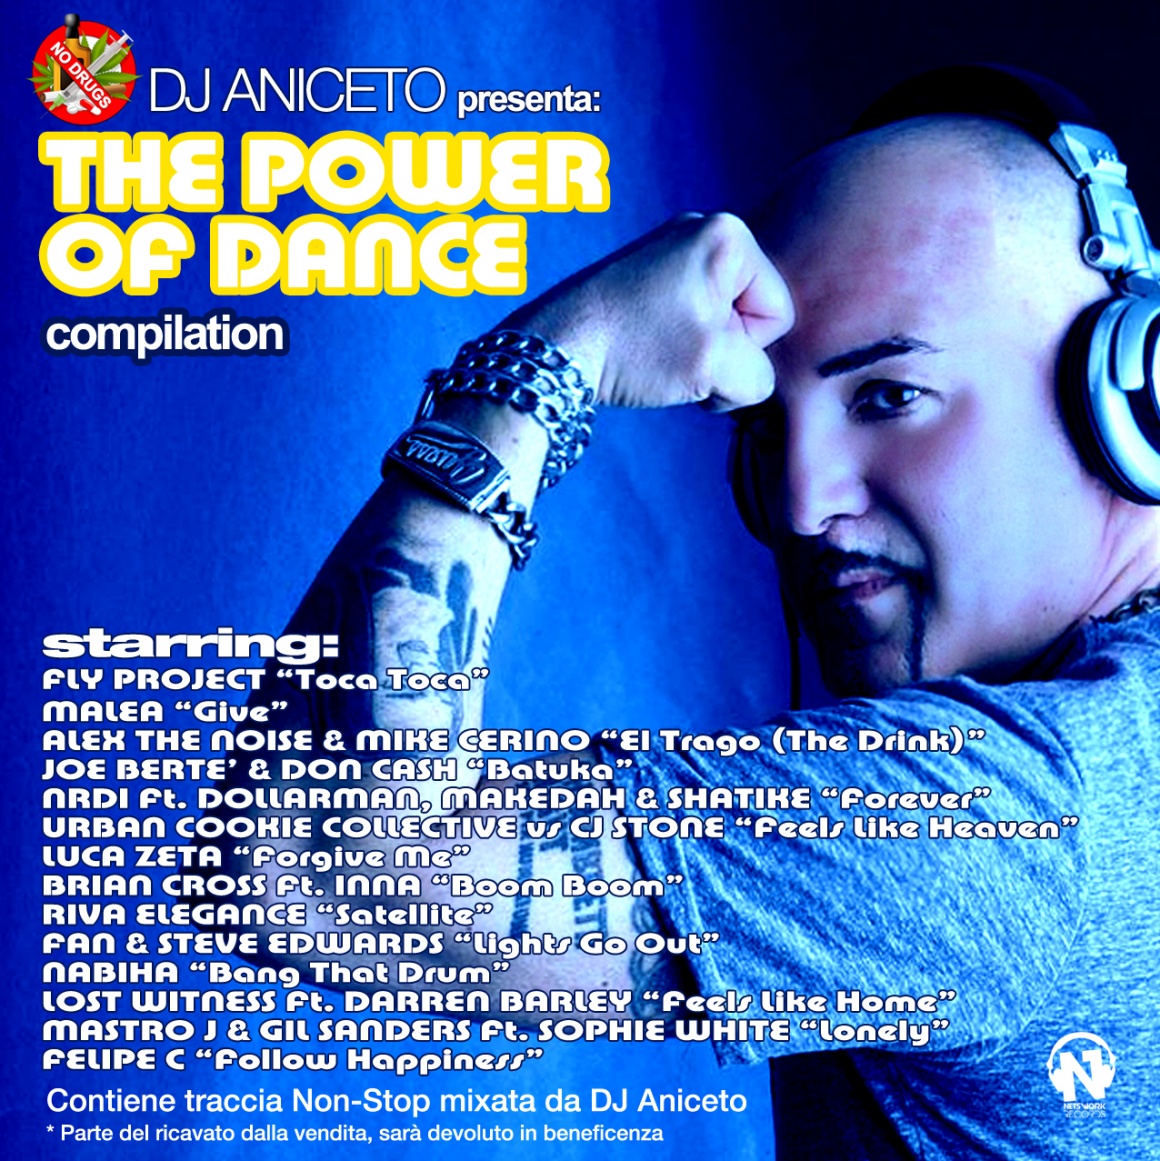 V/A – Dj Aniceto presents: The Power Of Dance Compilation